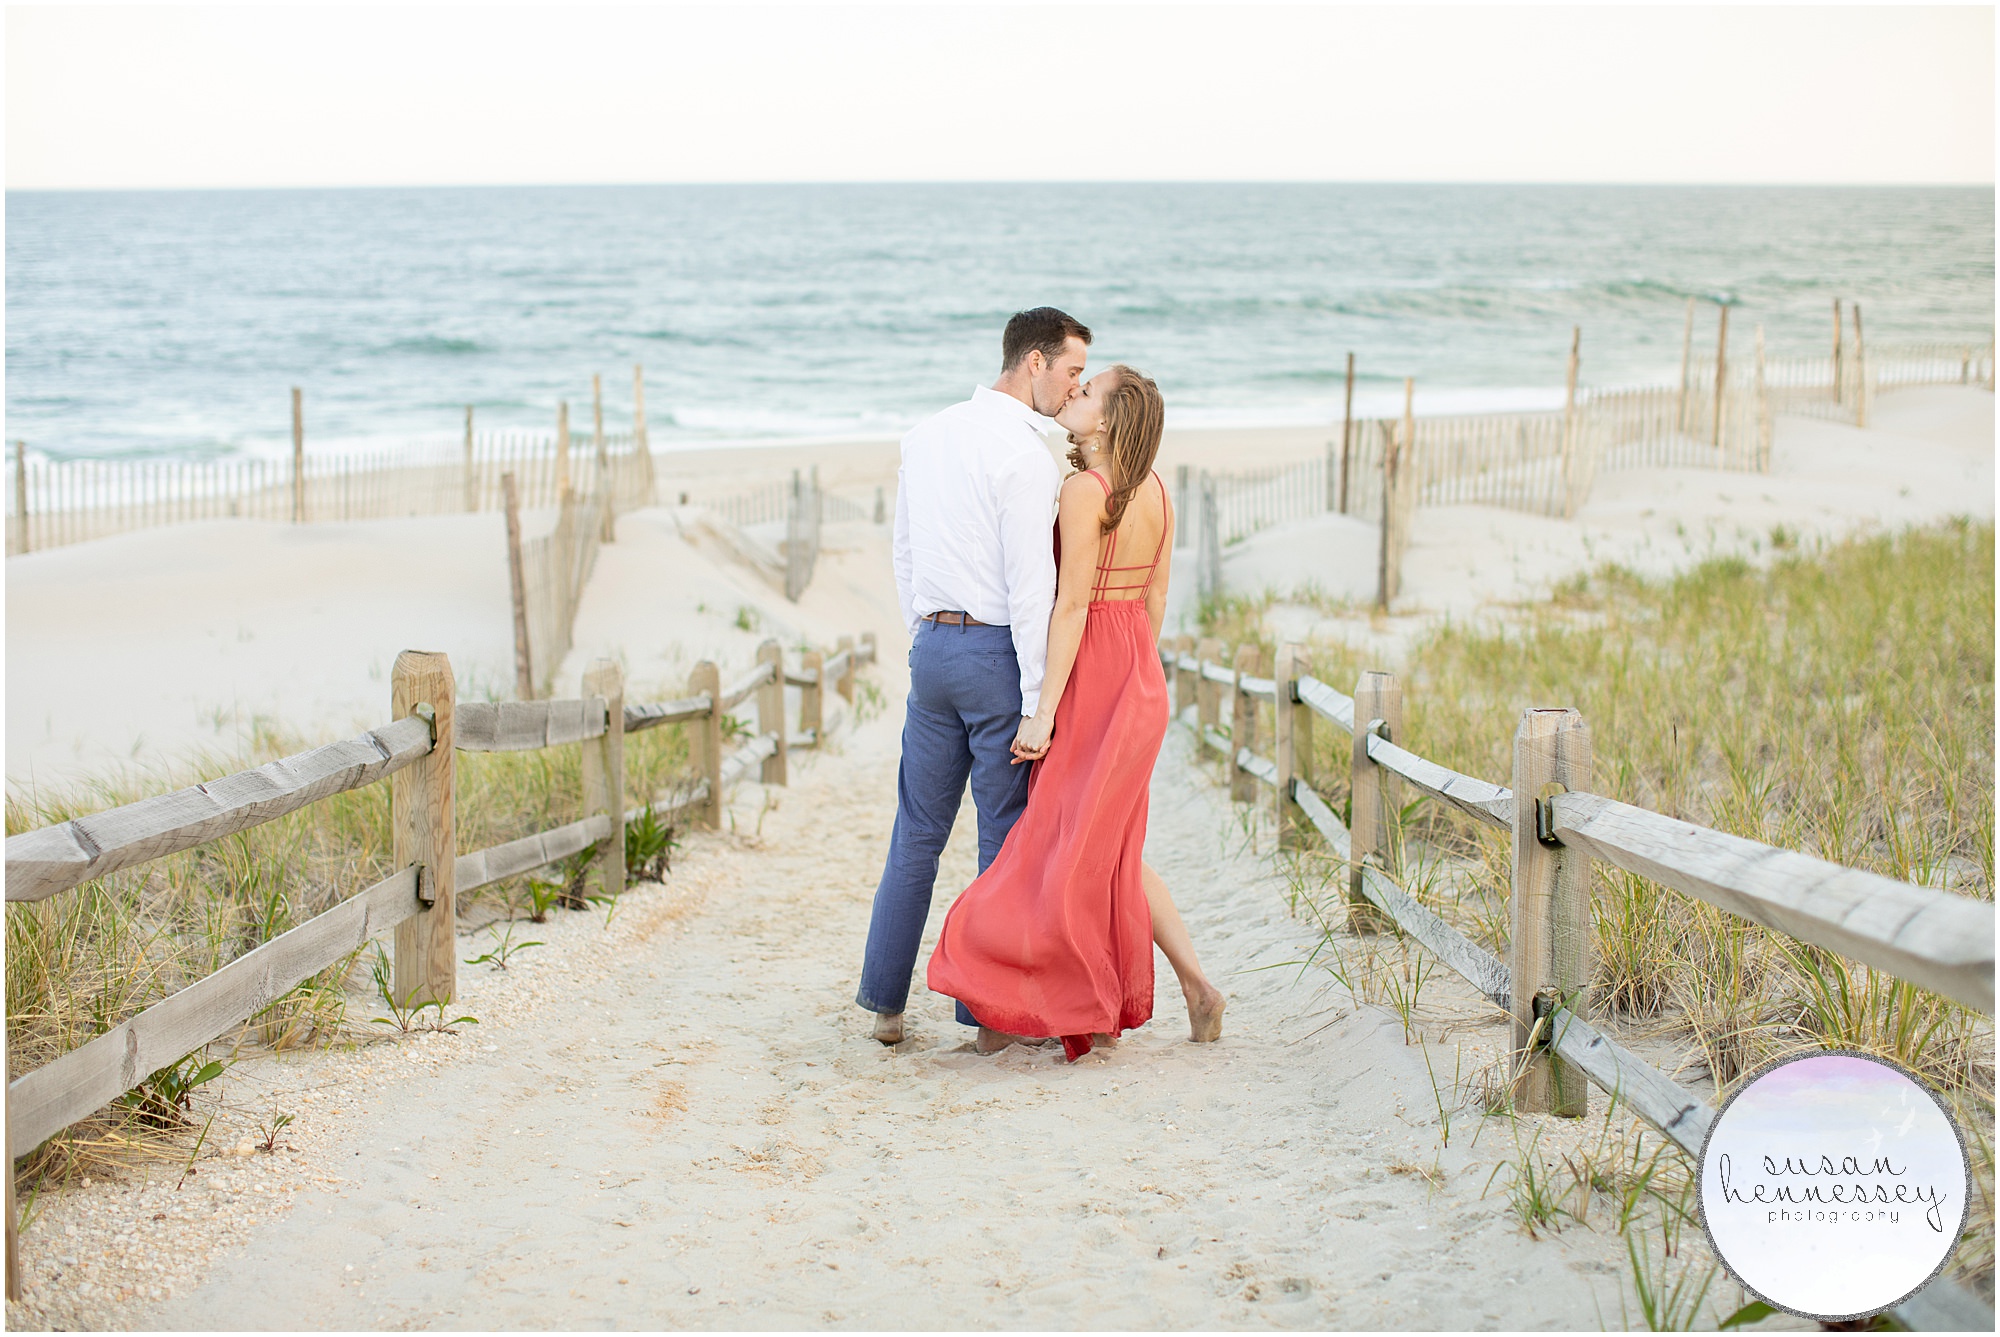 An engagement session at Long Beach Island